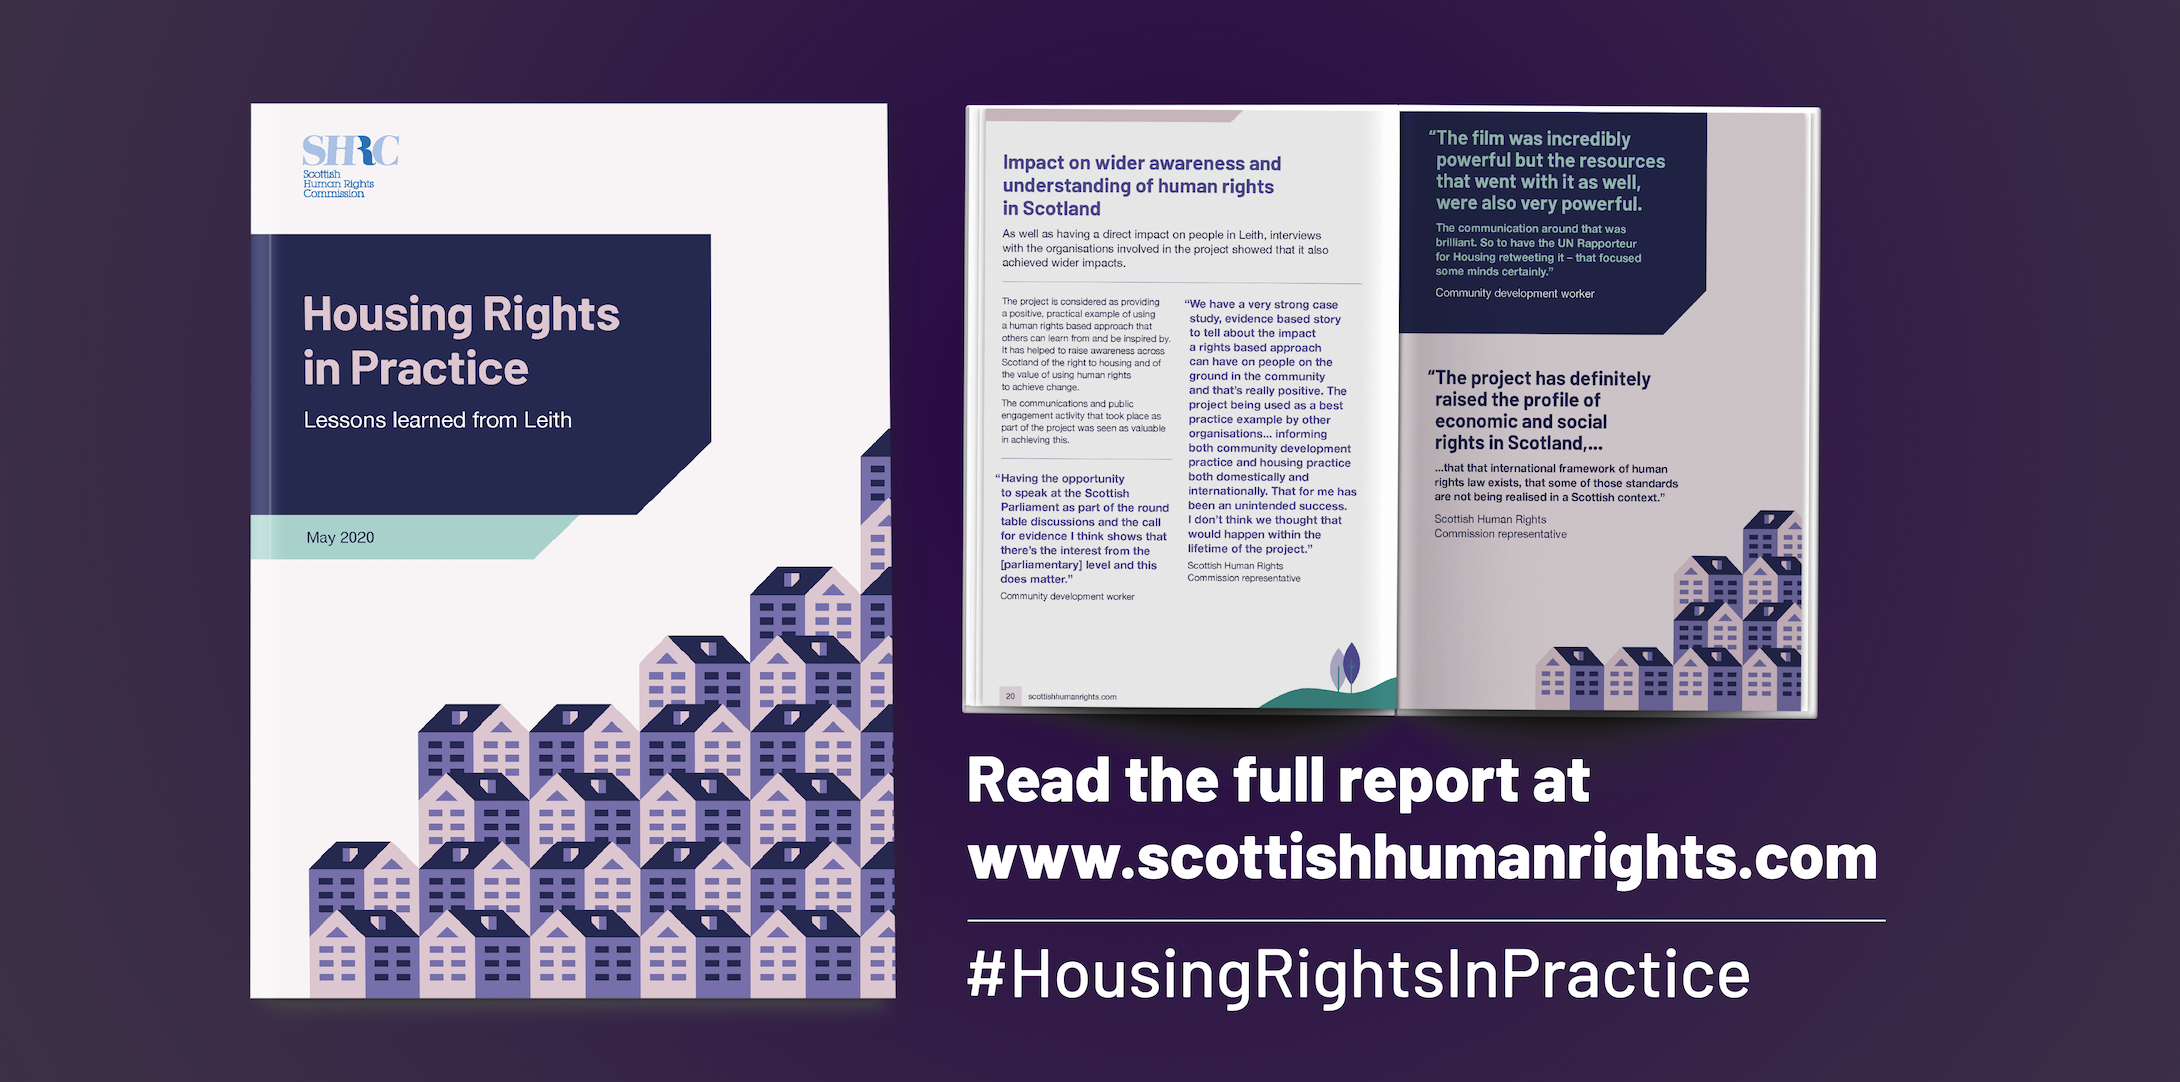 Leith housing rights pilot report launched by Scottish Human Rights Commission